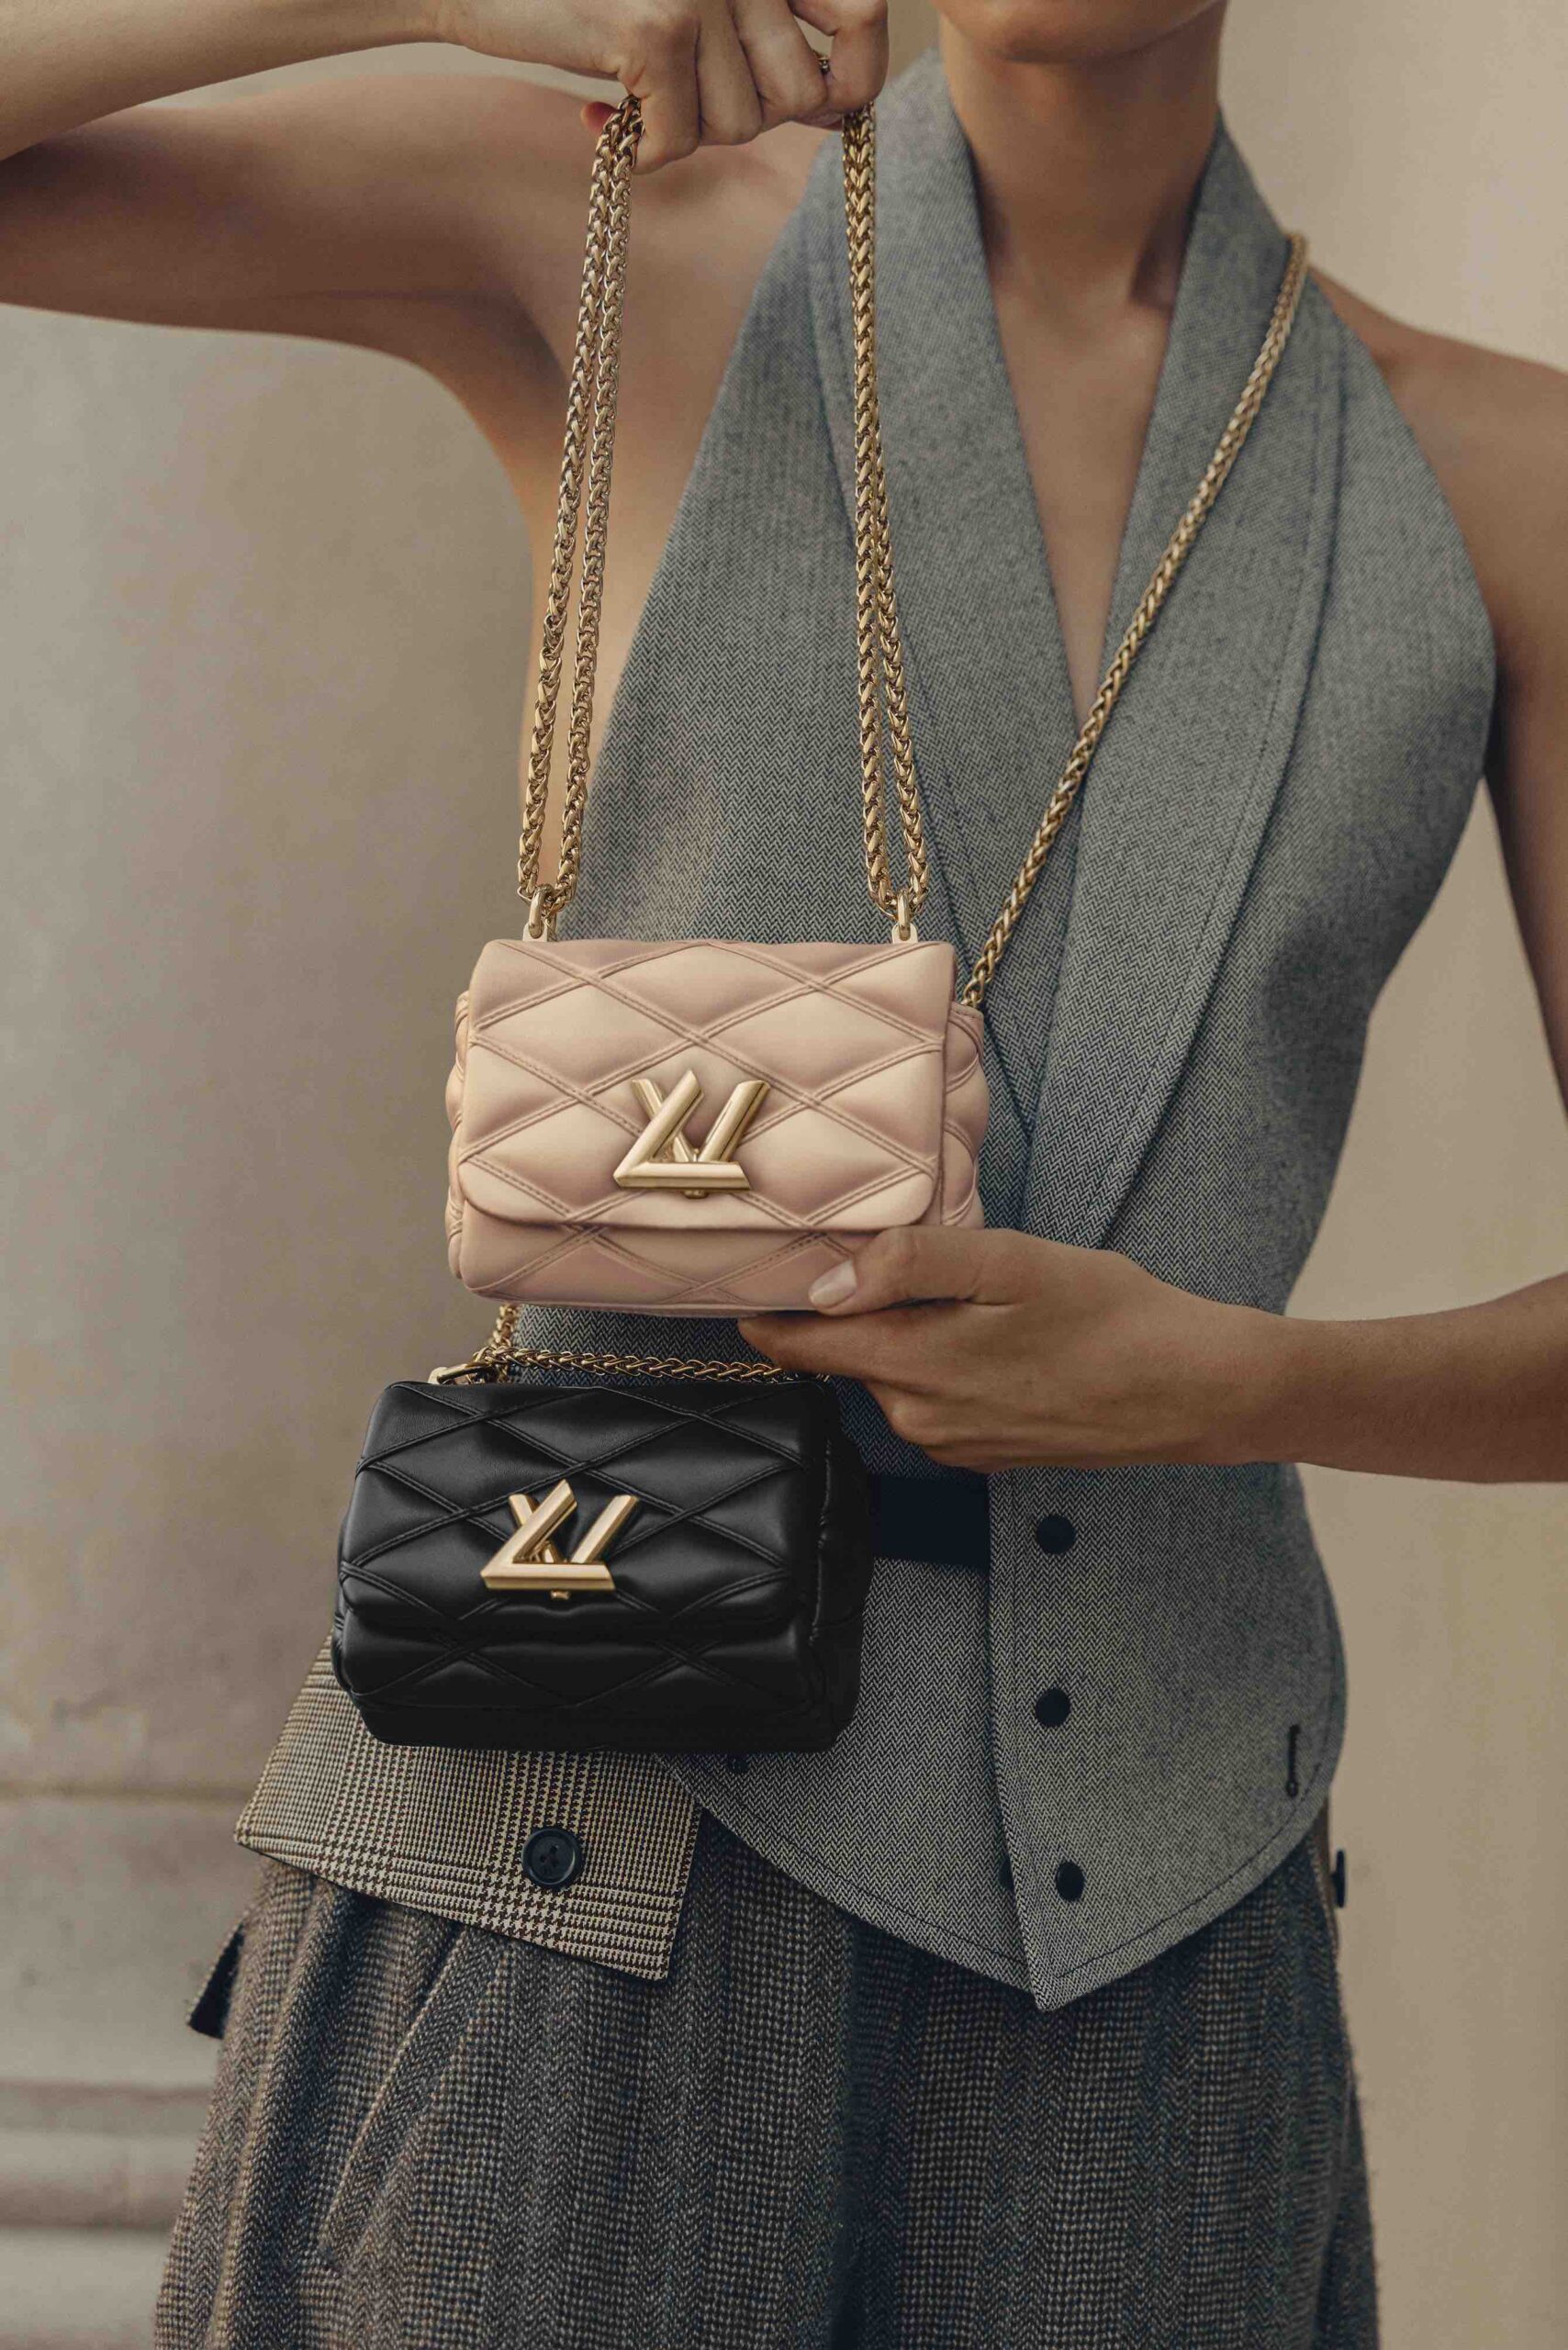 Louis Vuitton's GO-14 Bag Is Ready for the Future